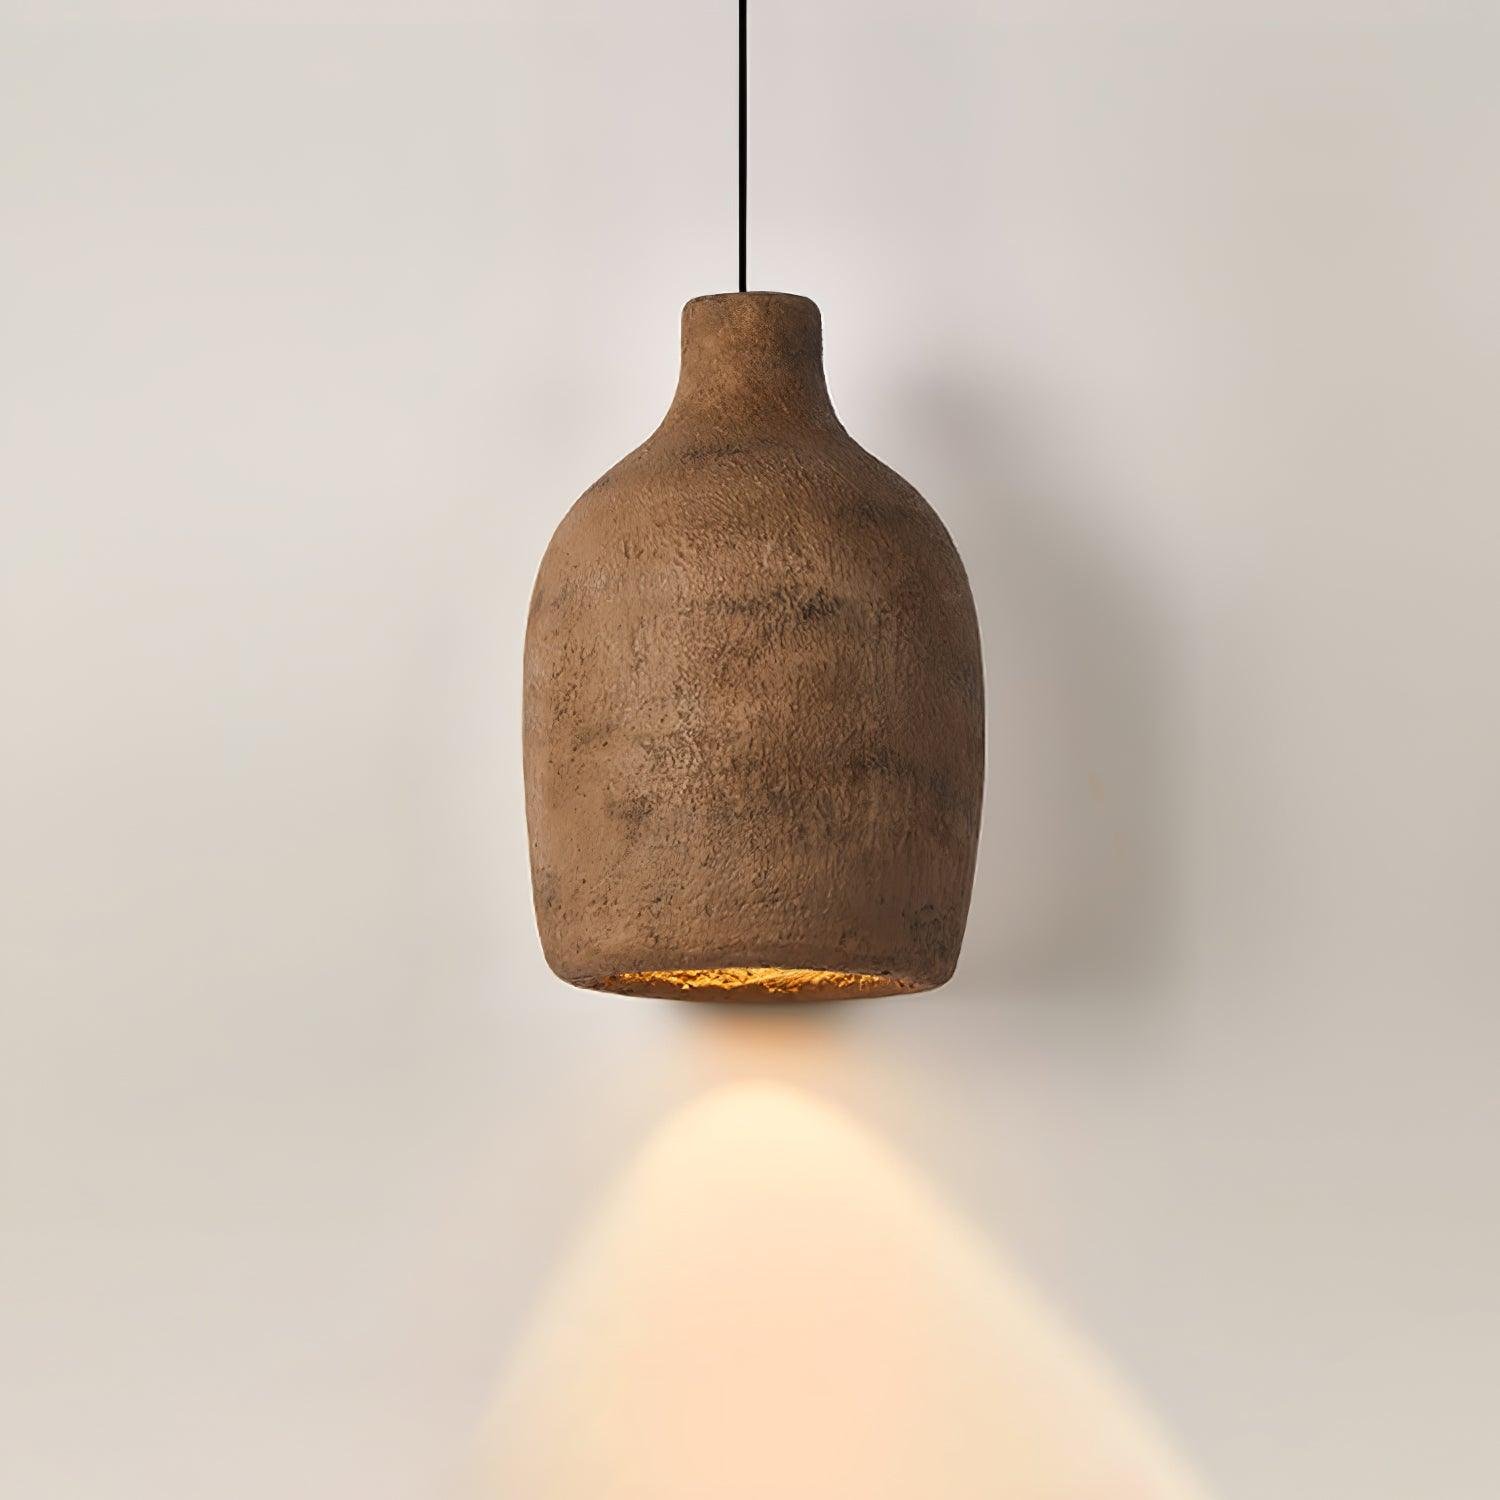 Brown Pendant Lamp in the Shape of a Milk Can, Diameter 11.8 inches x Height 18.1 inches (30 cm x 46 cm)